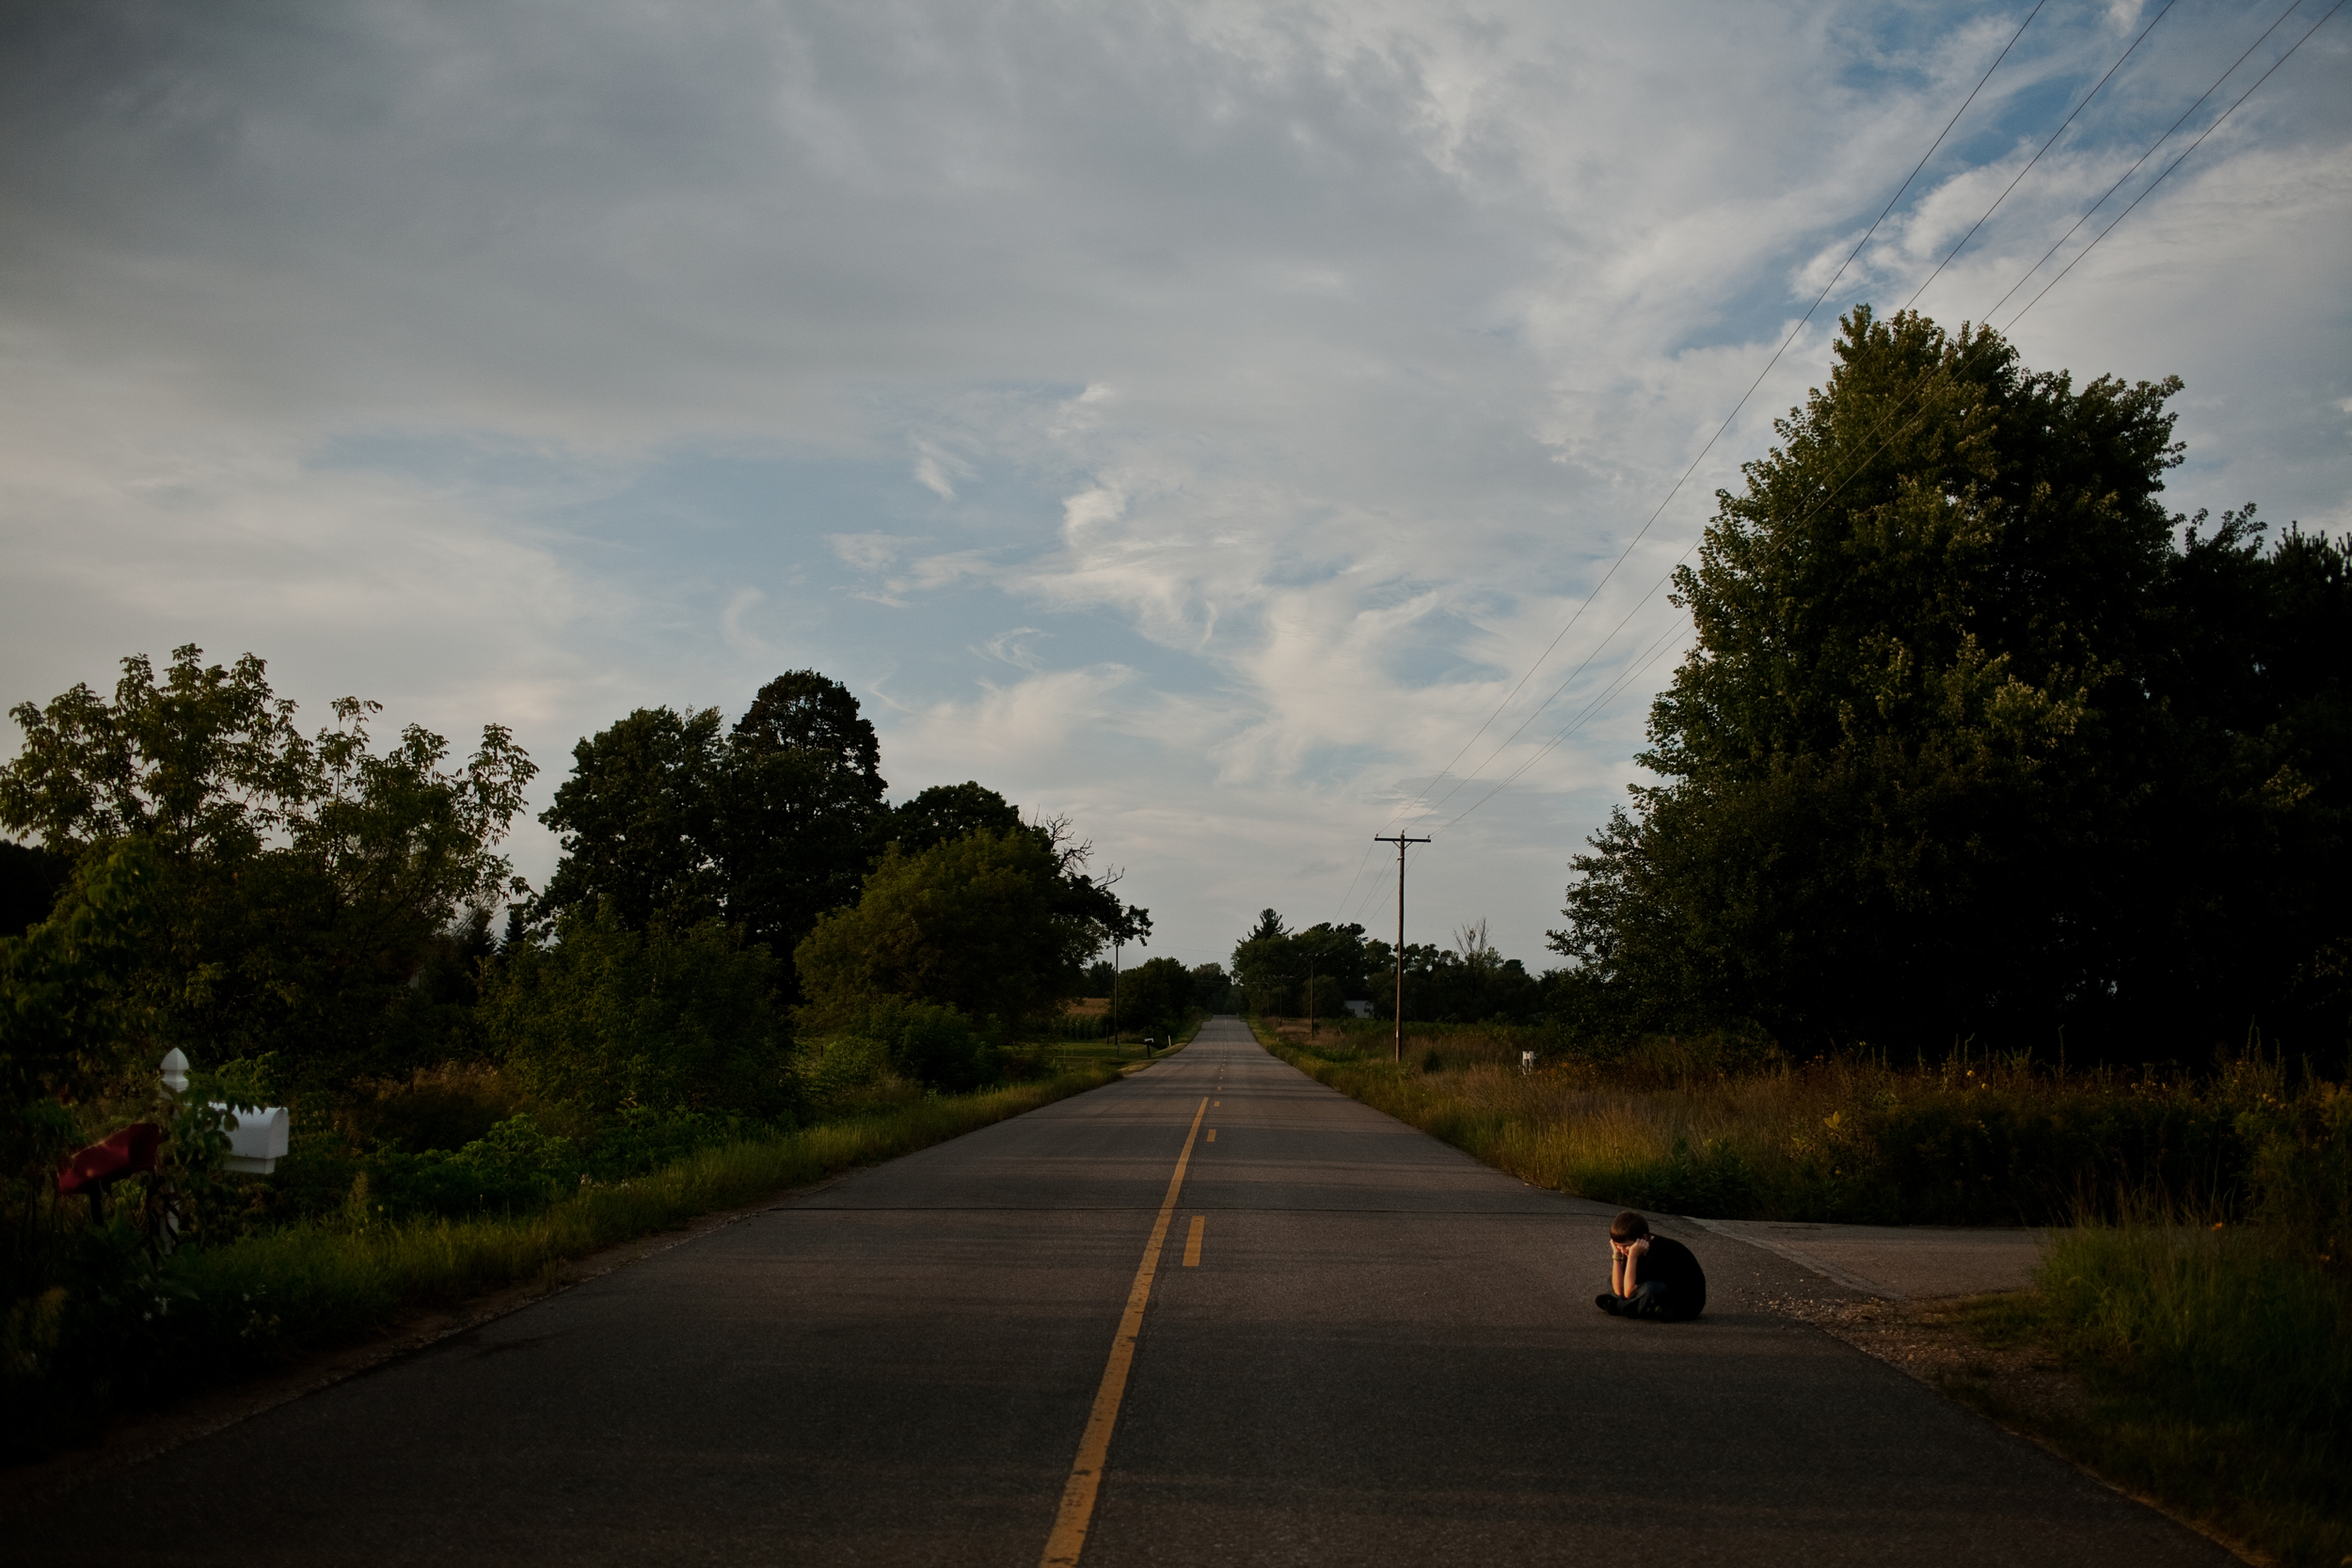  Isaac sits alone, outside his uncle's house as the sun sets over the wide open road. 